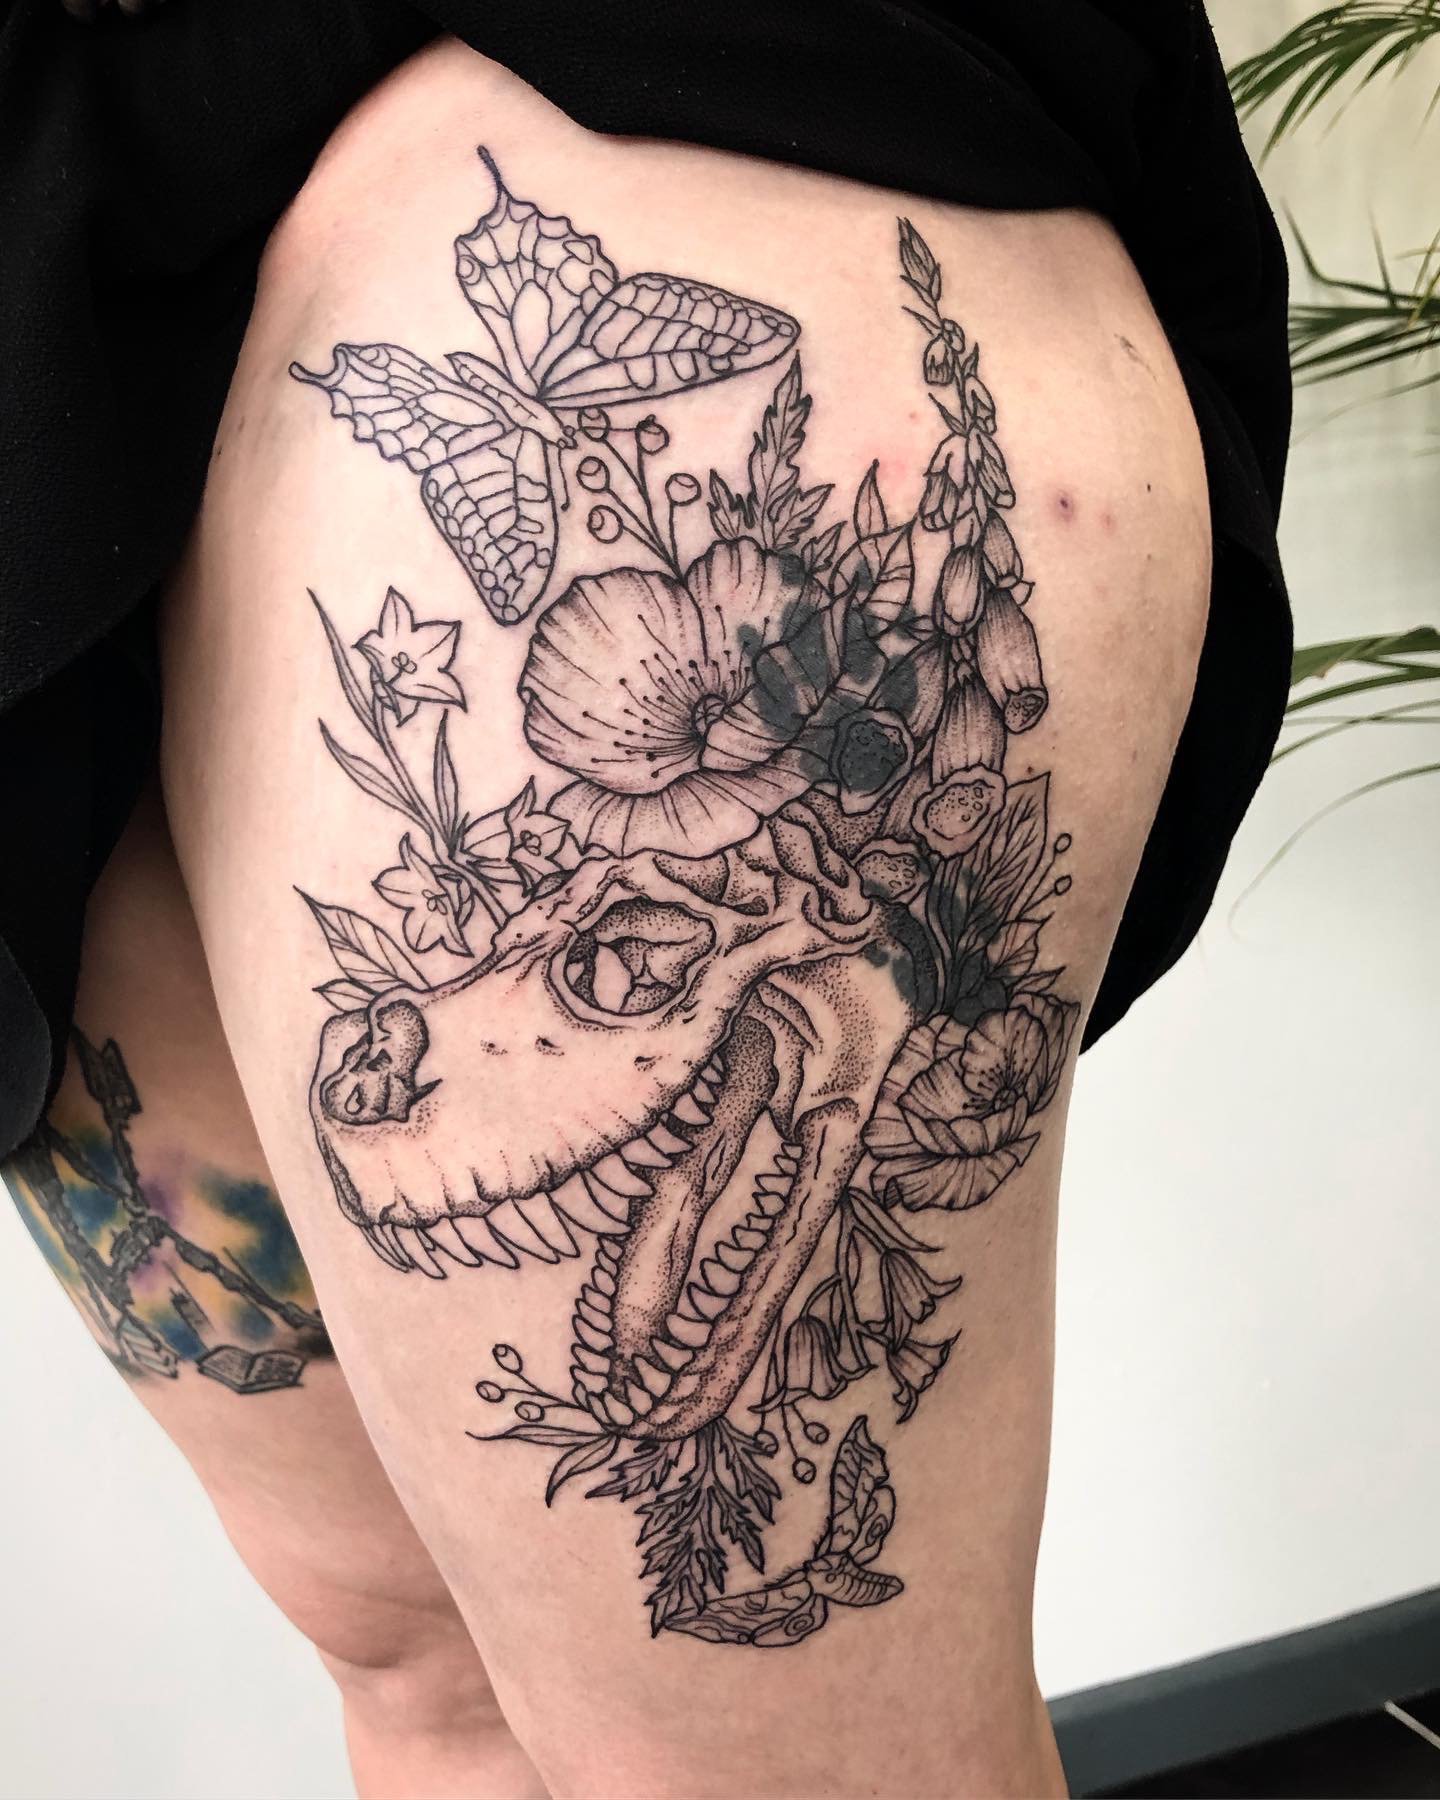 Emerald Tattoo Company (UK) on X: "Great start to this large thigh piece cover up by @rebeccy_tattoos We're excited to see how it'll look with all the colours in it next time! #